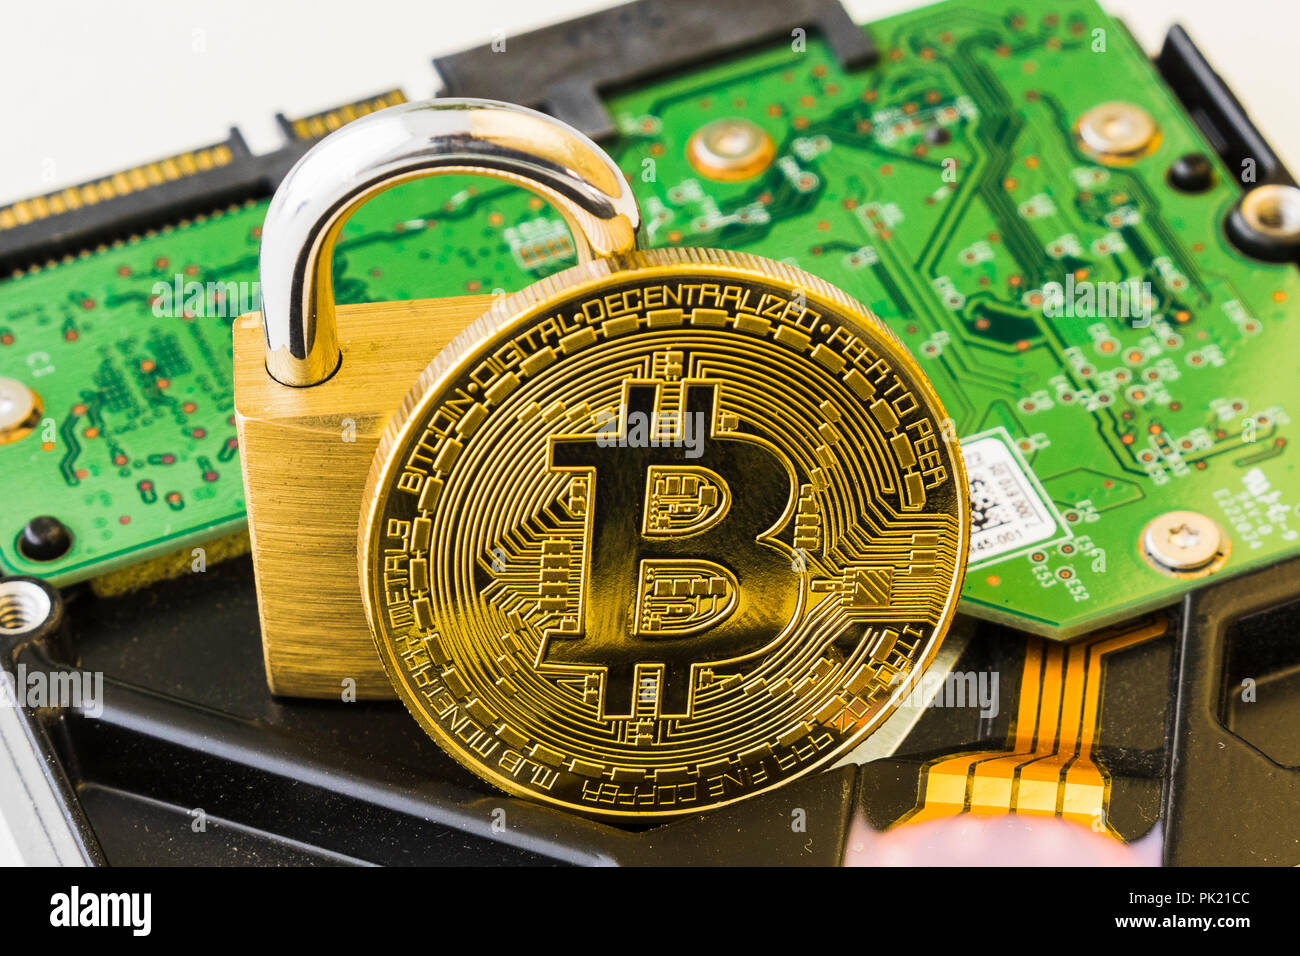 A Bitcoin Cryptocurrency Digital Bit Coin BTC Currency Technology Business Internet Concept. Stock Photo